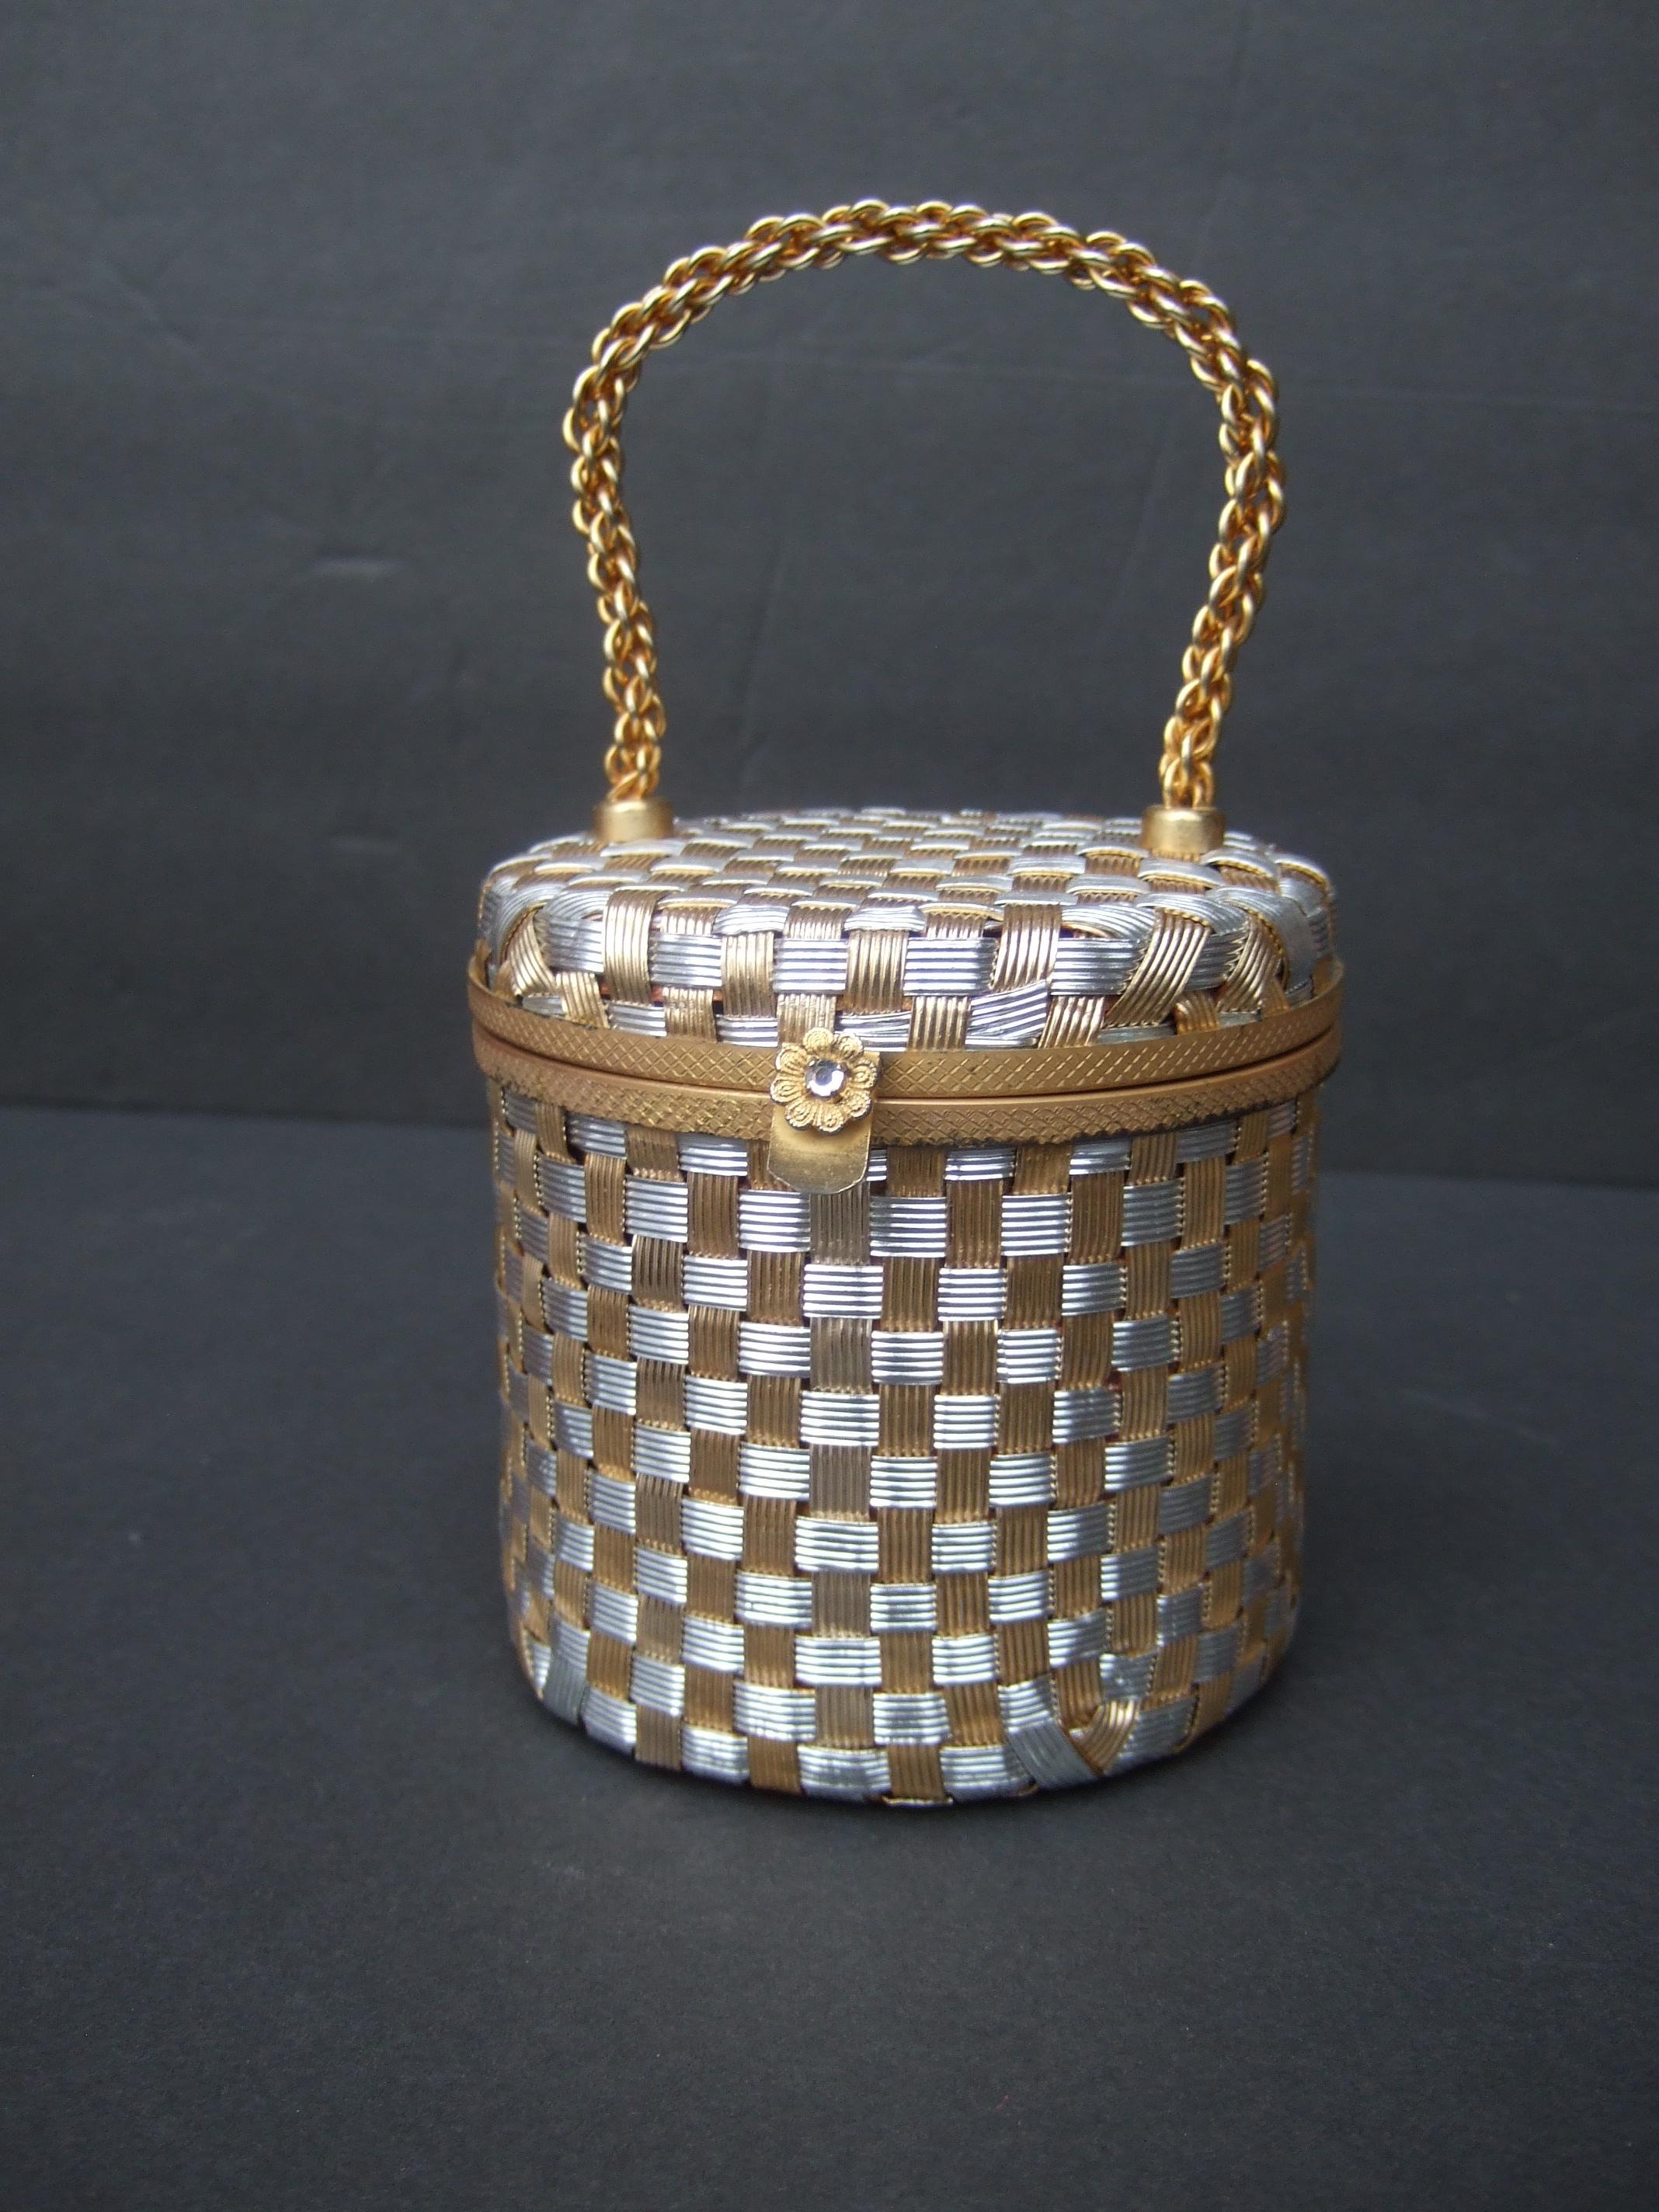 Italian mixed metal basket weave diminutive evening bag designed by Walborg c 1960s
The charming small size cylinder shaped handbag is designed with woven bands of silver
and gold tone metals in a basket weave pattern

Carried with a stationary